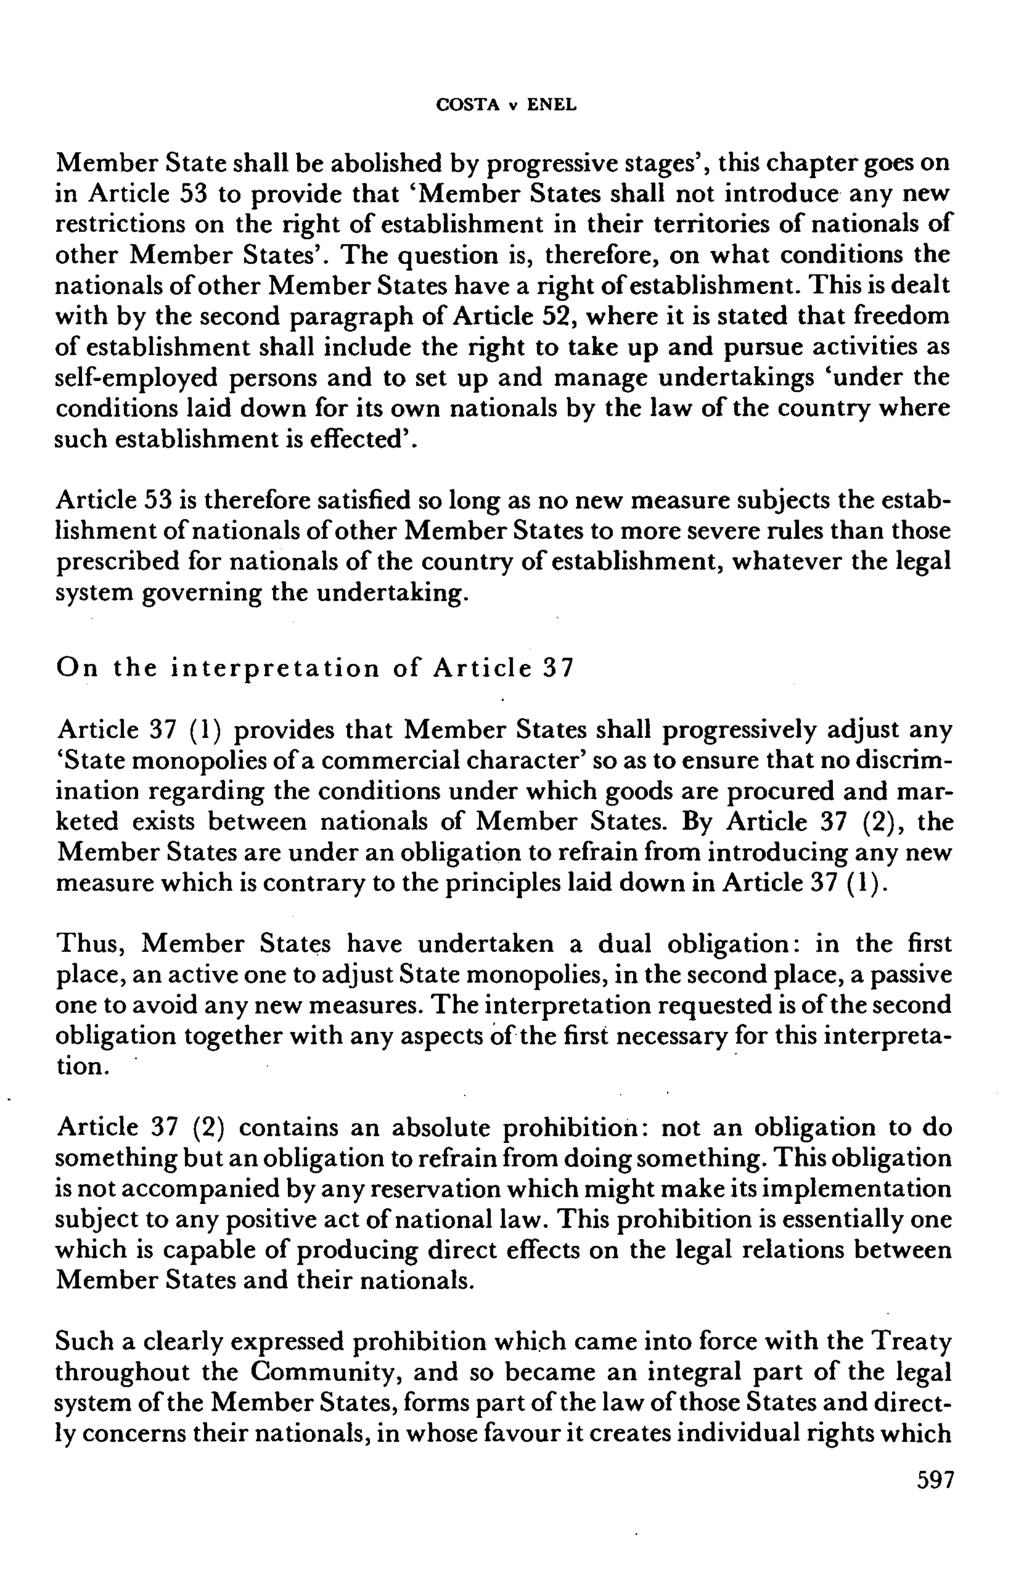 character' COSTA v ENEL Member State shall be abolished by progressive stages', this chapter goes on in Article 53 to provide that 'Member States shall not introduce any new restrictions on the right